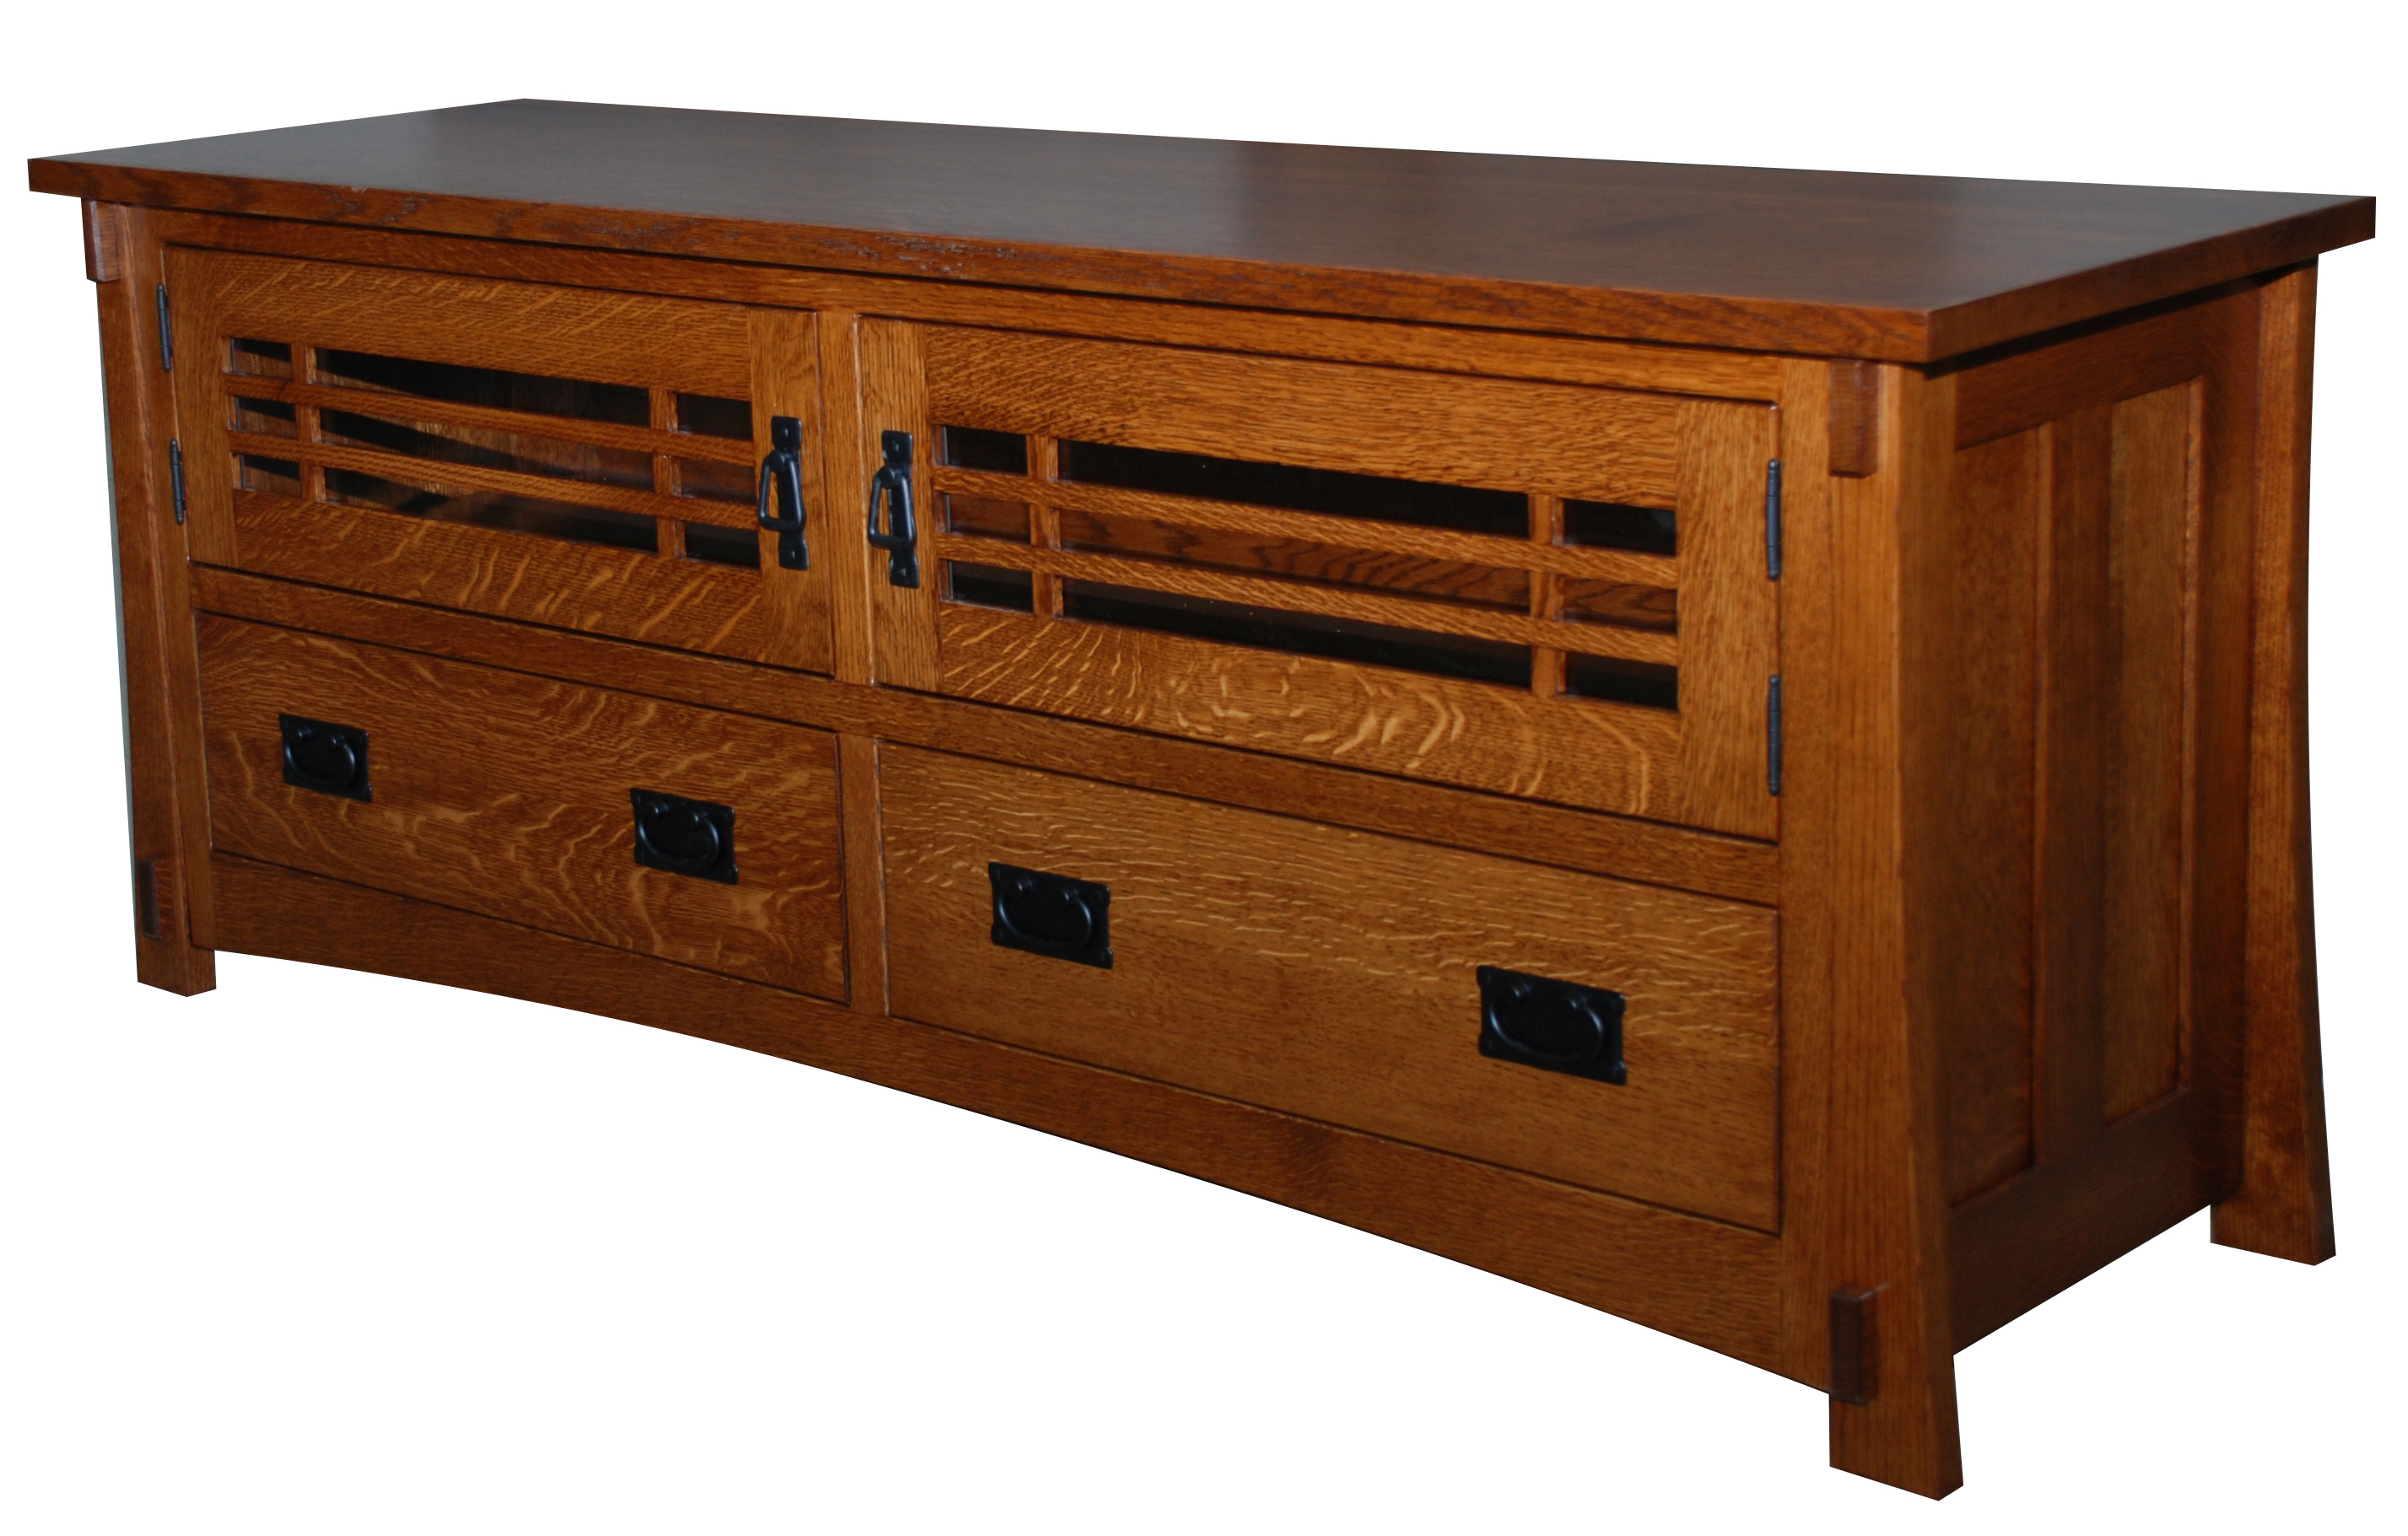 Dutch County Mission Plasma TV Stand | Amish Valley Products